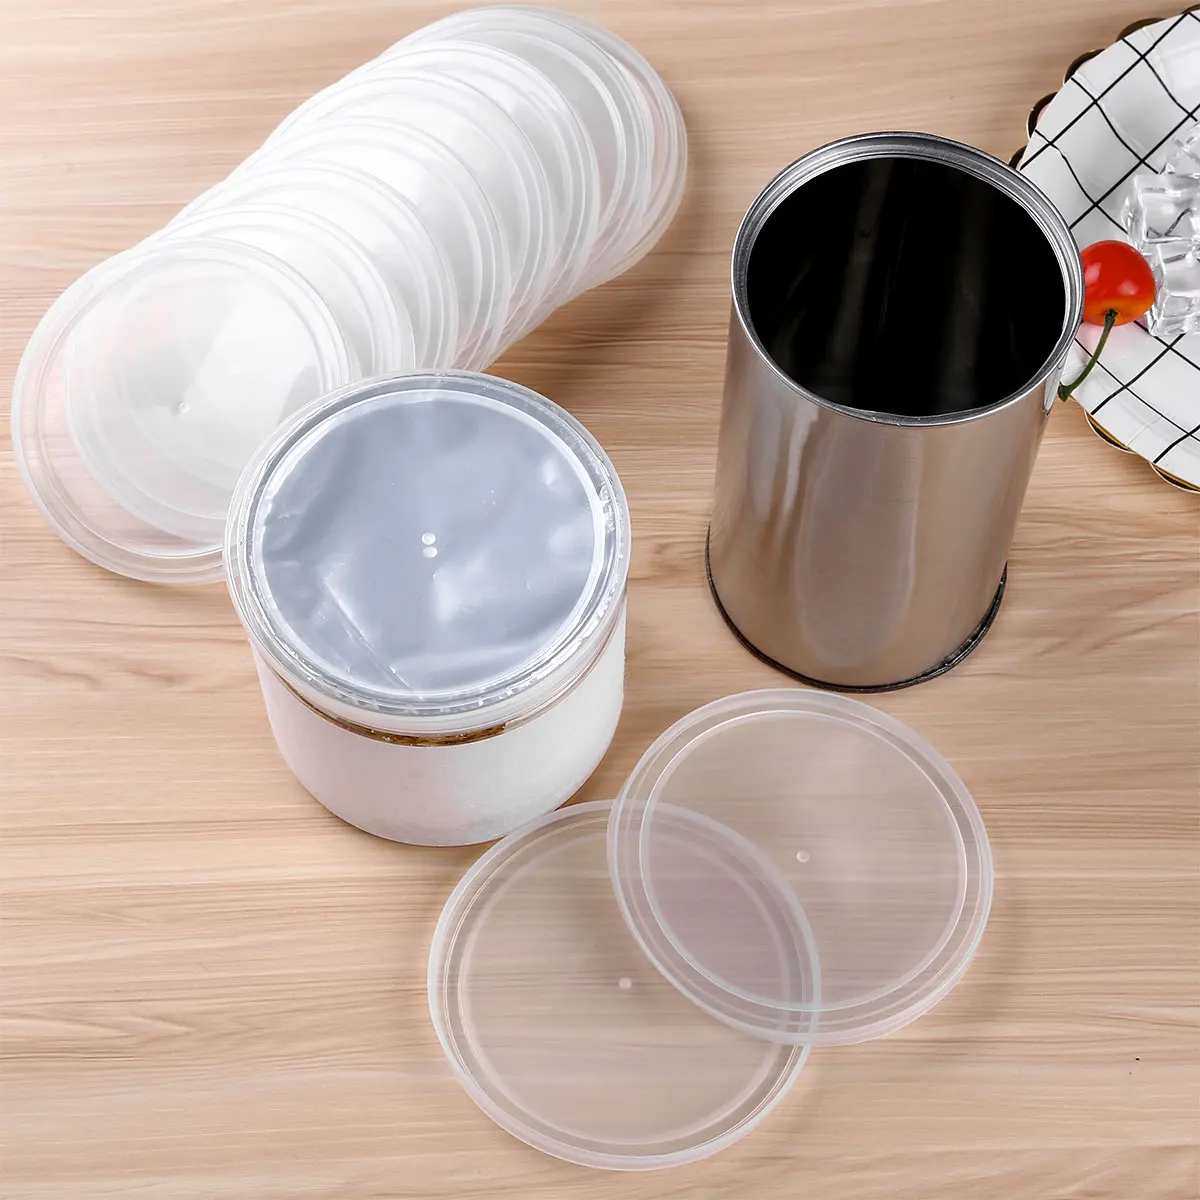 

12 Pcs Reusable Can Covers BPA-Free Plastic Tight Seals Can Covers Lids for Canned Goods or Pet Dog Cat Food Can Tins Lids